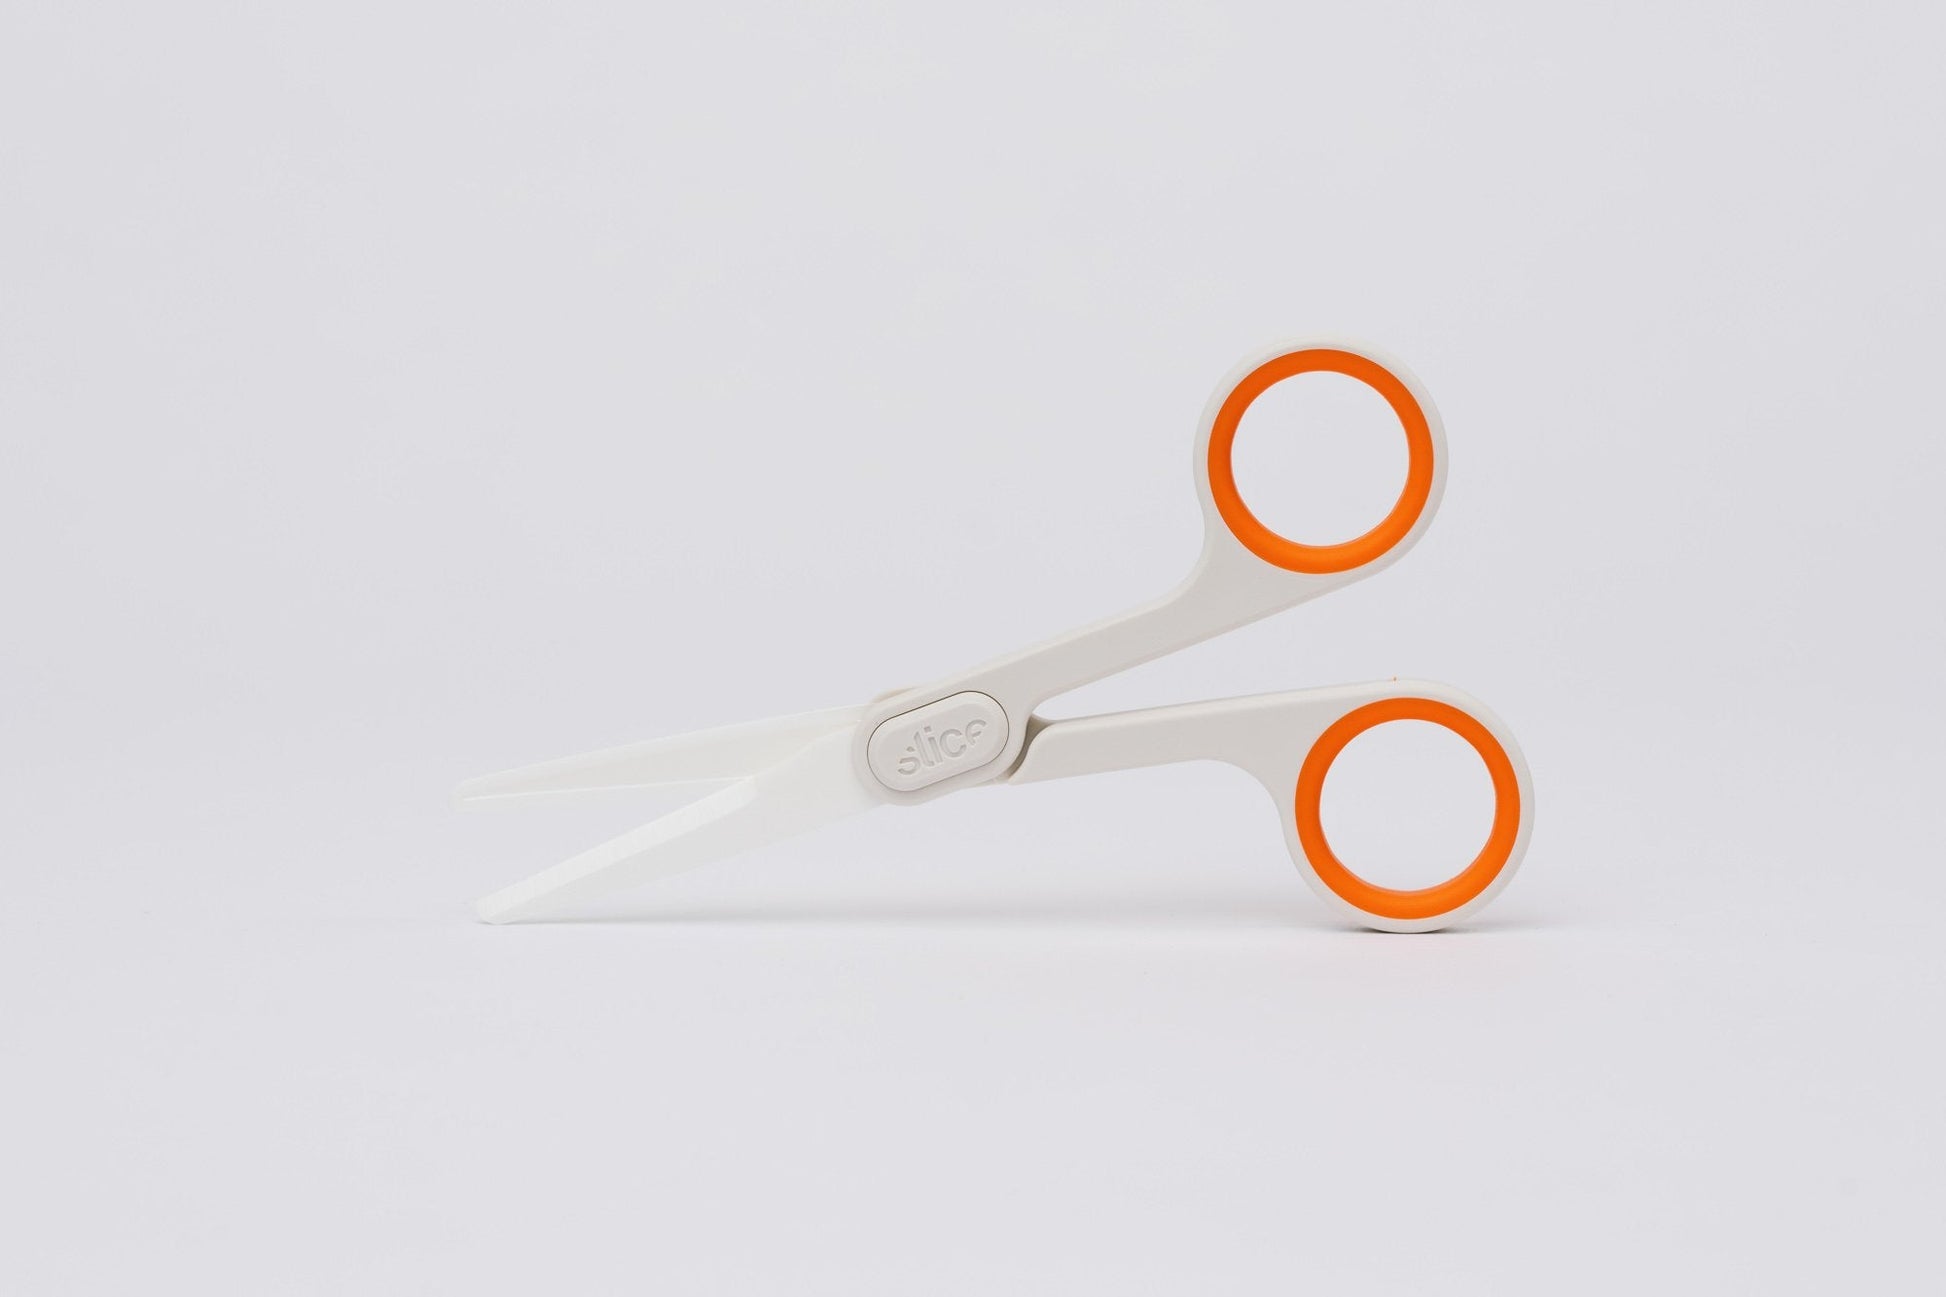 Slice Small Scissors Type: Rounded Tip:Facility Safety and Maintenance